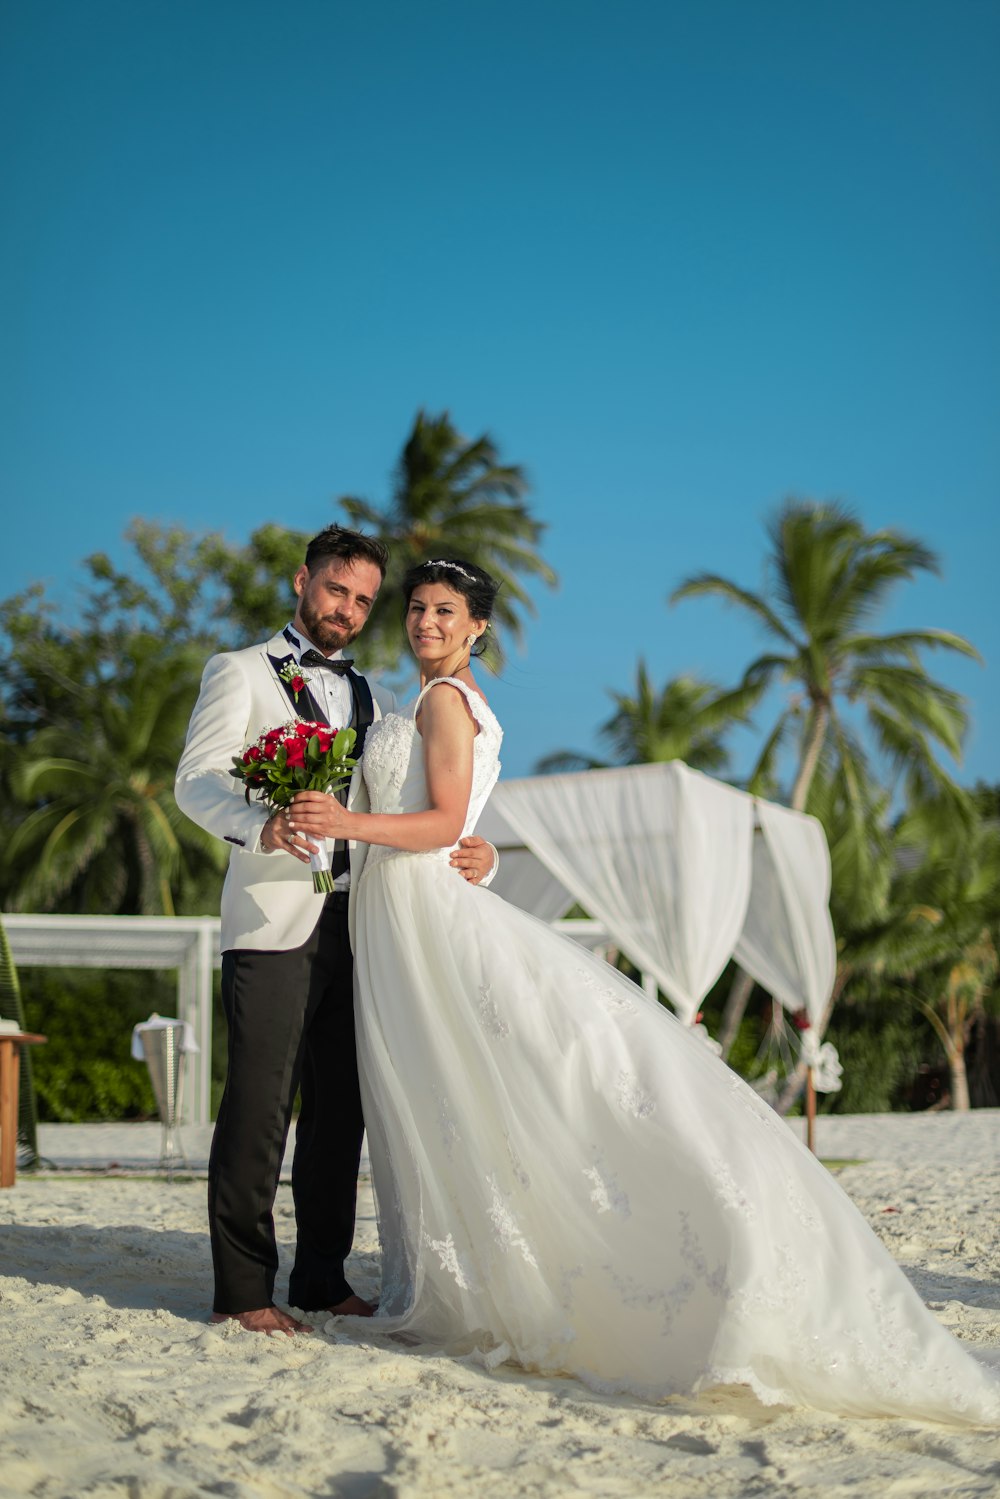 man in black suit and woman in white wedding dress standing on brown sand during daytime